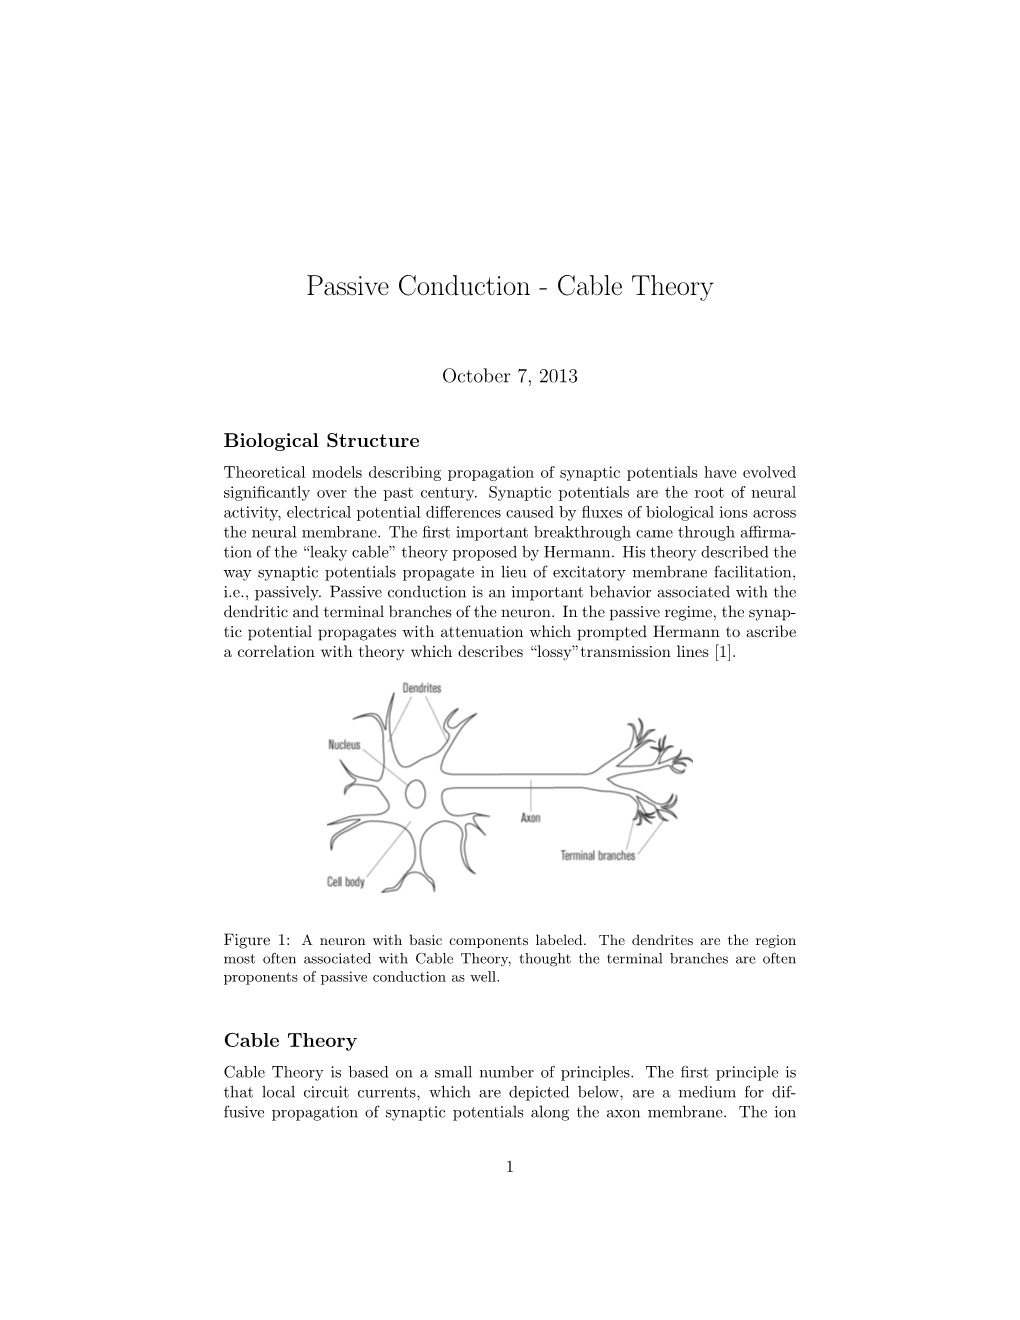 Passive Conduction - Cable Theory